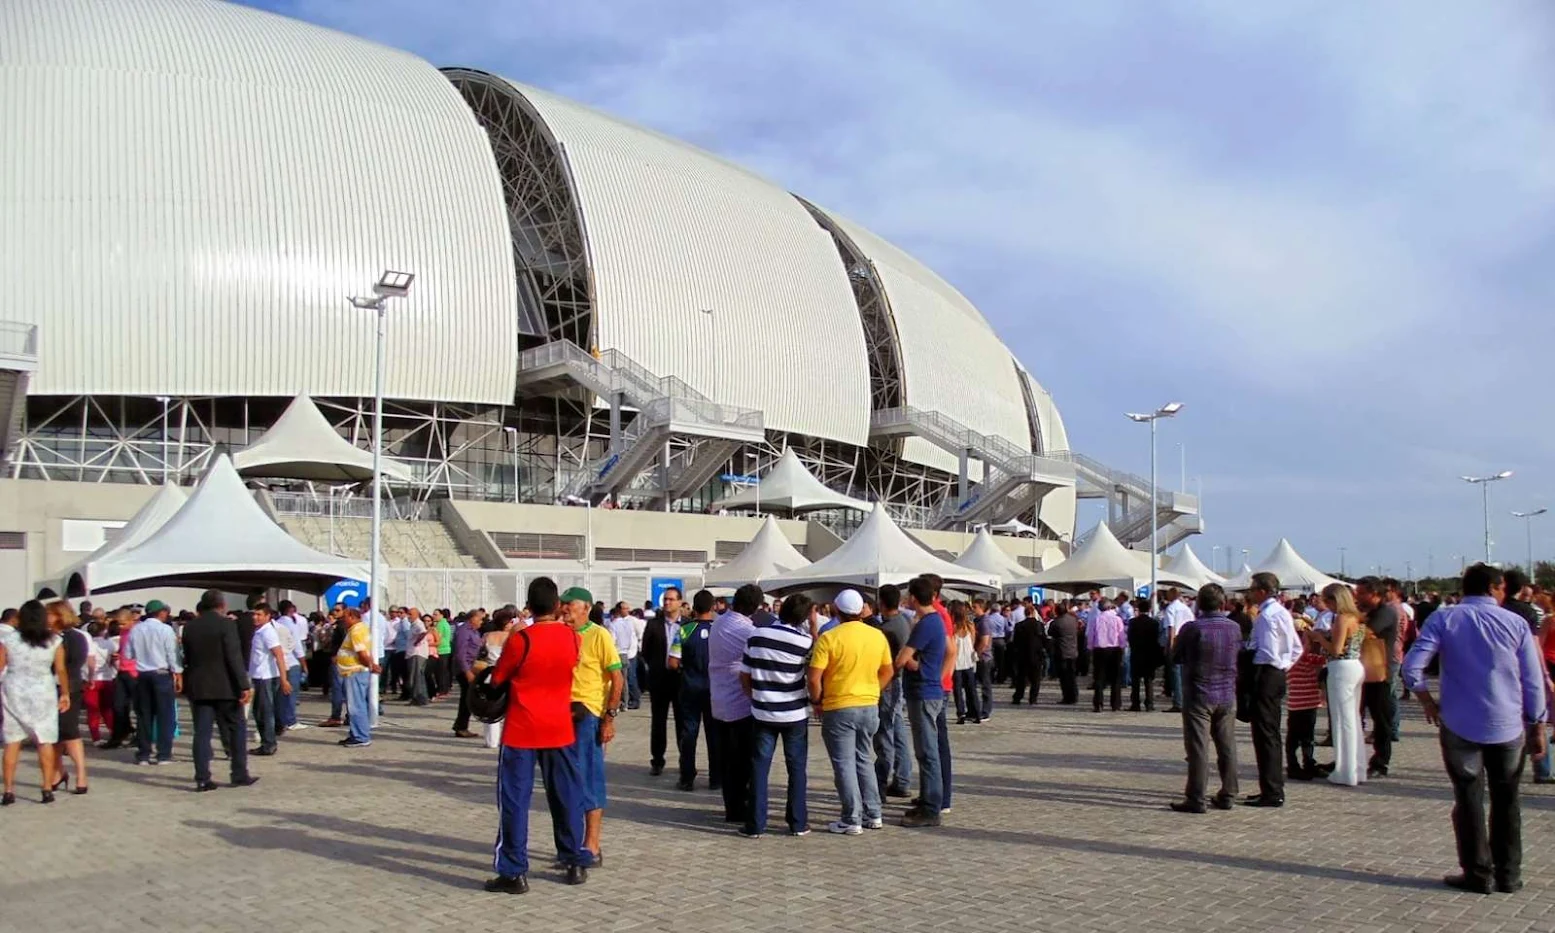 officially opened Arena das Dunas by Populous